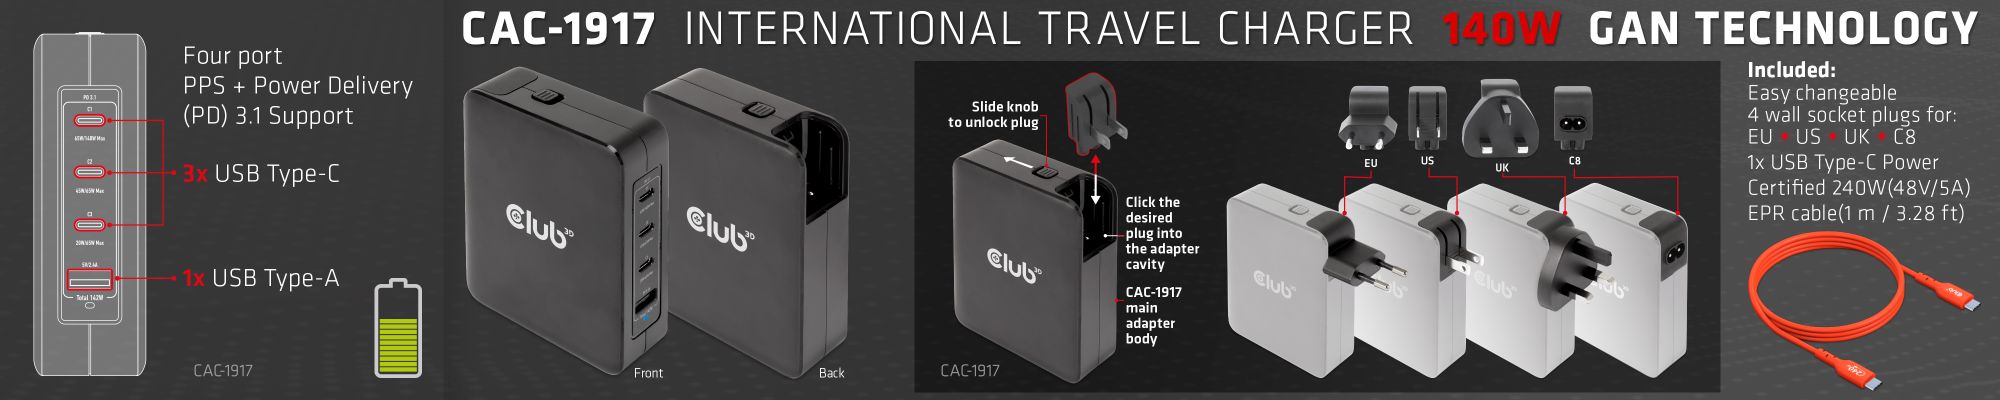 International Travel Charger 140W GaN technology, Four port USB Type-A(1x) and -C(3x), PPS + Power Delivery(PD) 3.1 Support